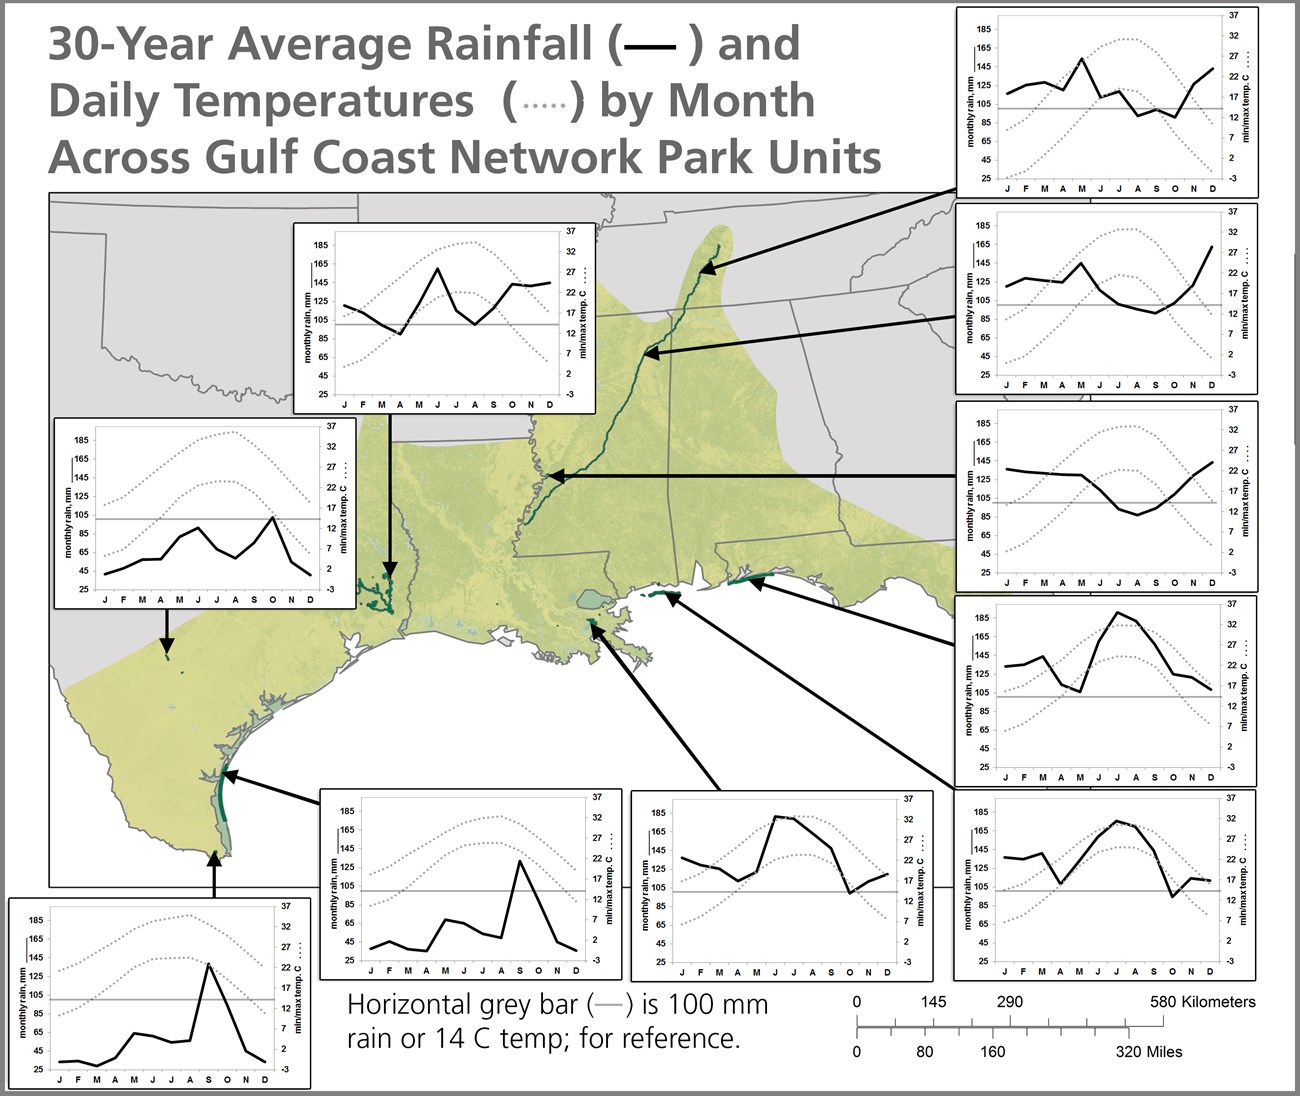 Annual climate patterns for GULN park units. The Gulf Coast Network is shaded yellow, and the park units are dark green.